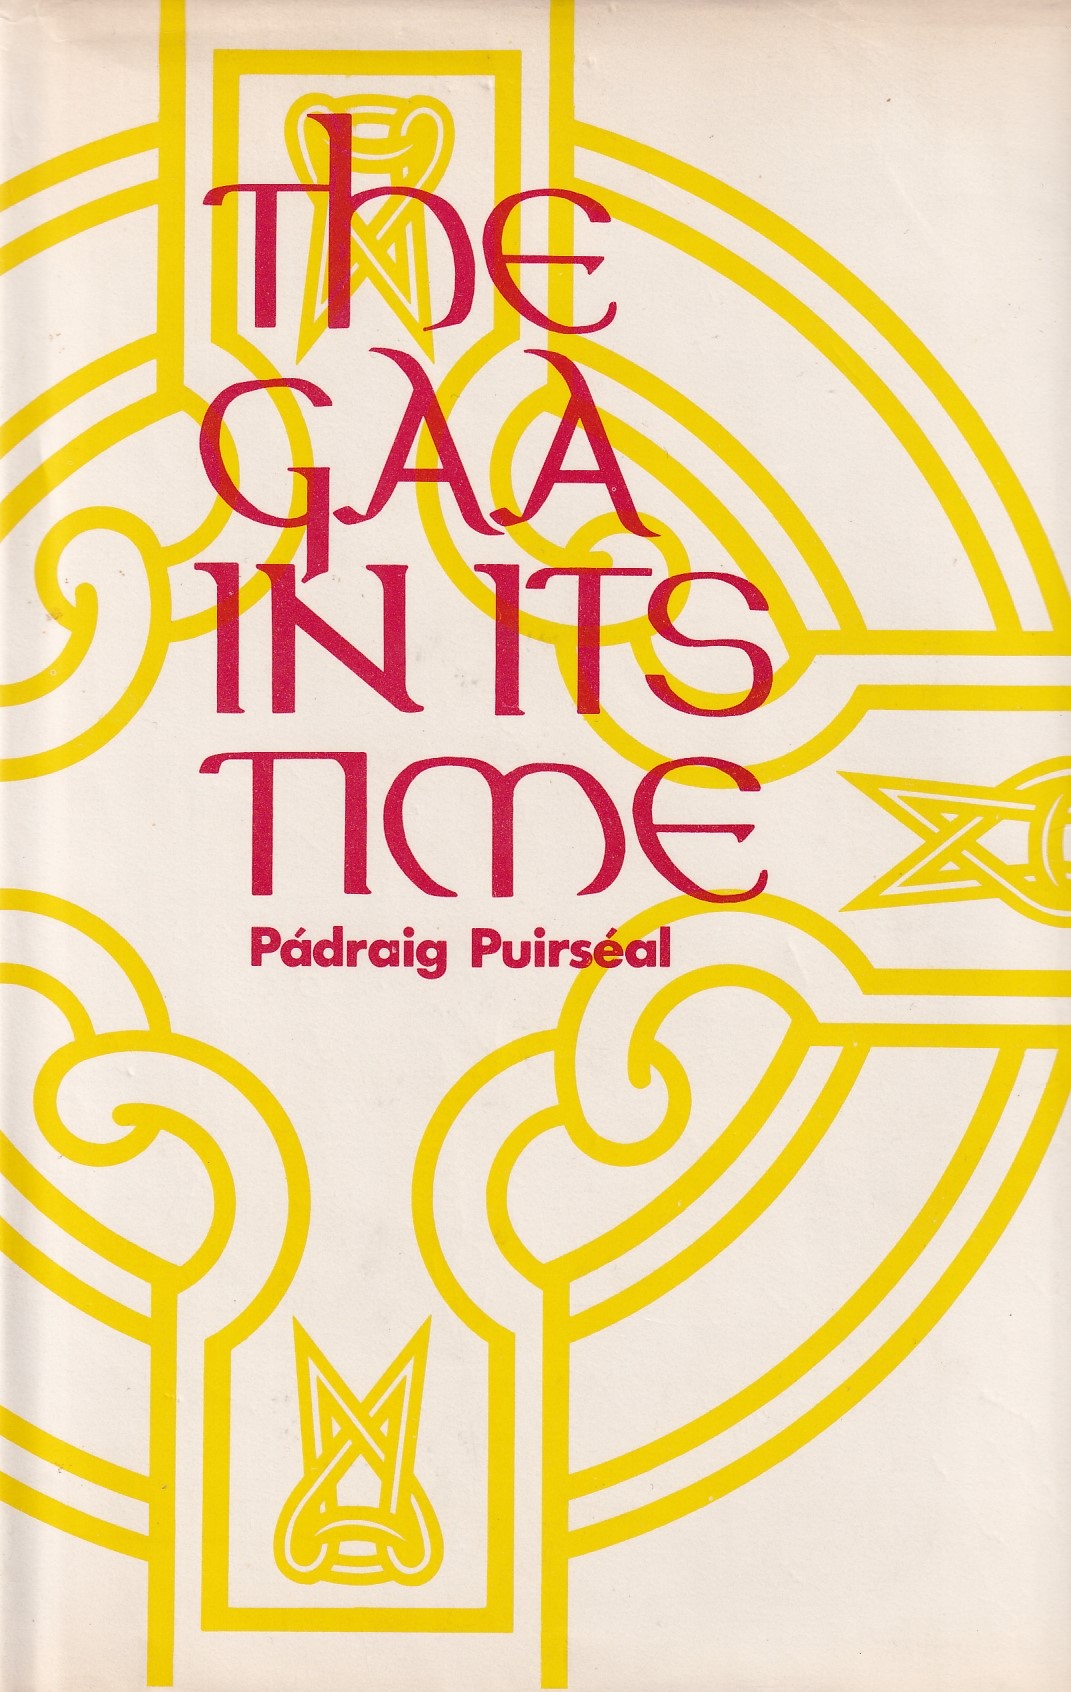 The GAA In Its Time by Pádraig Puirséal